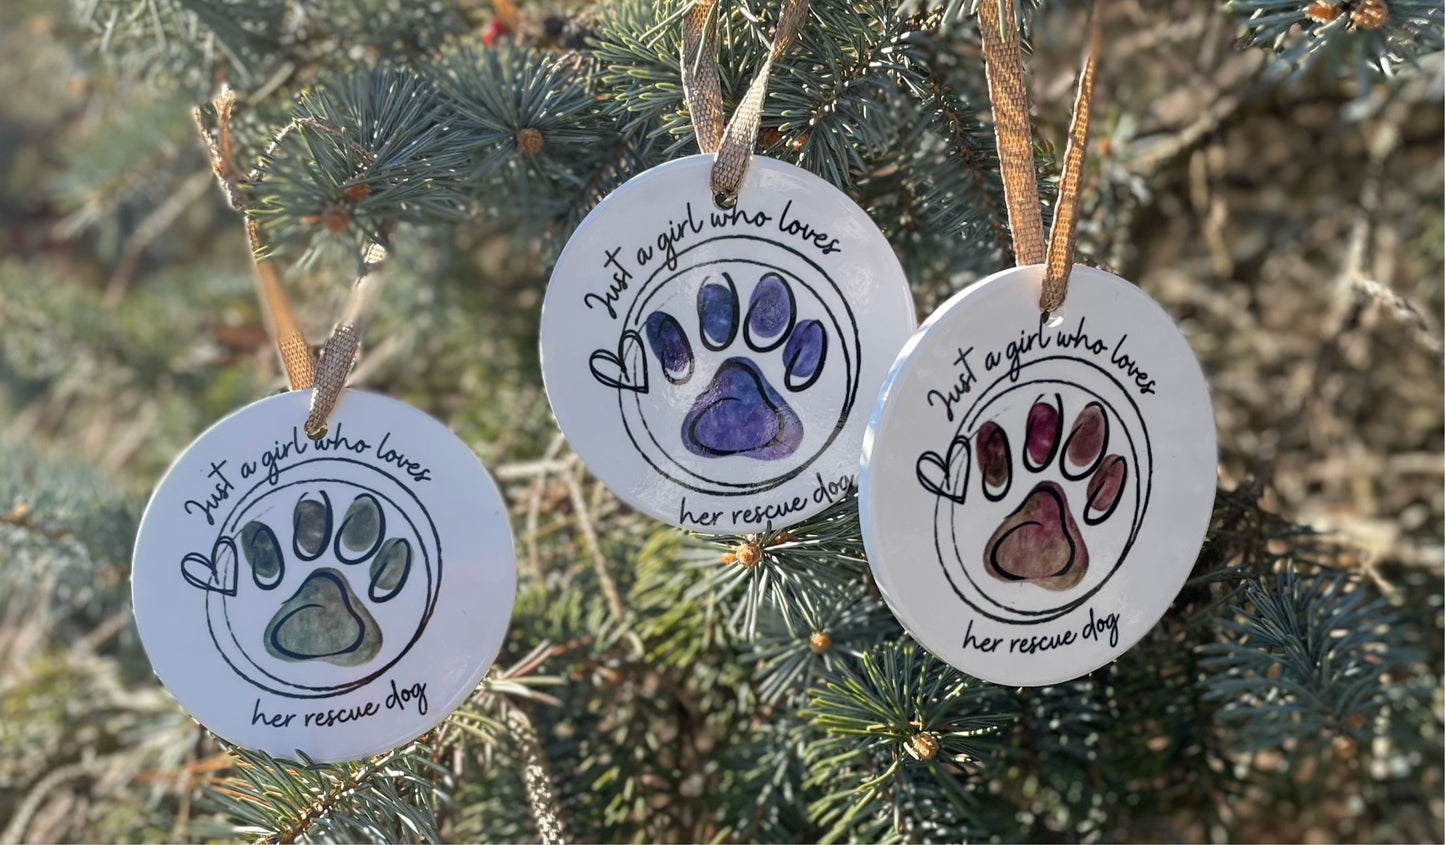 Girl who loves her rescue dog Ornaments